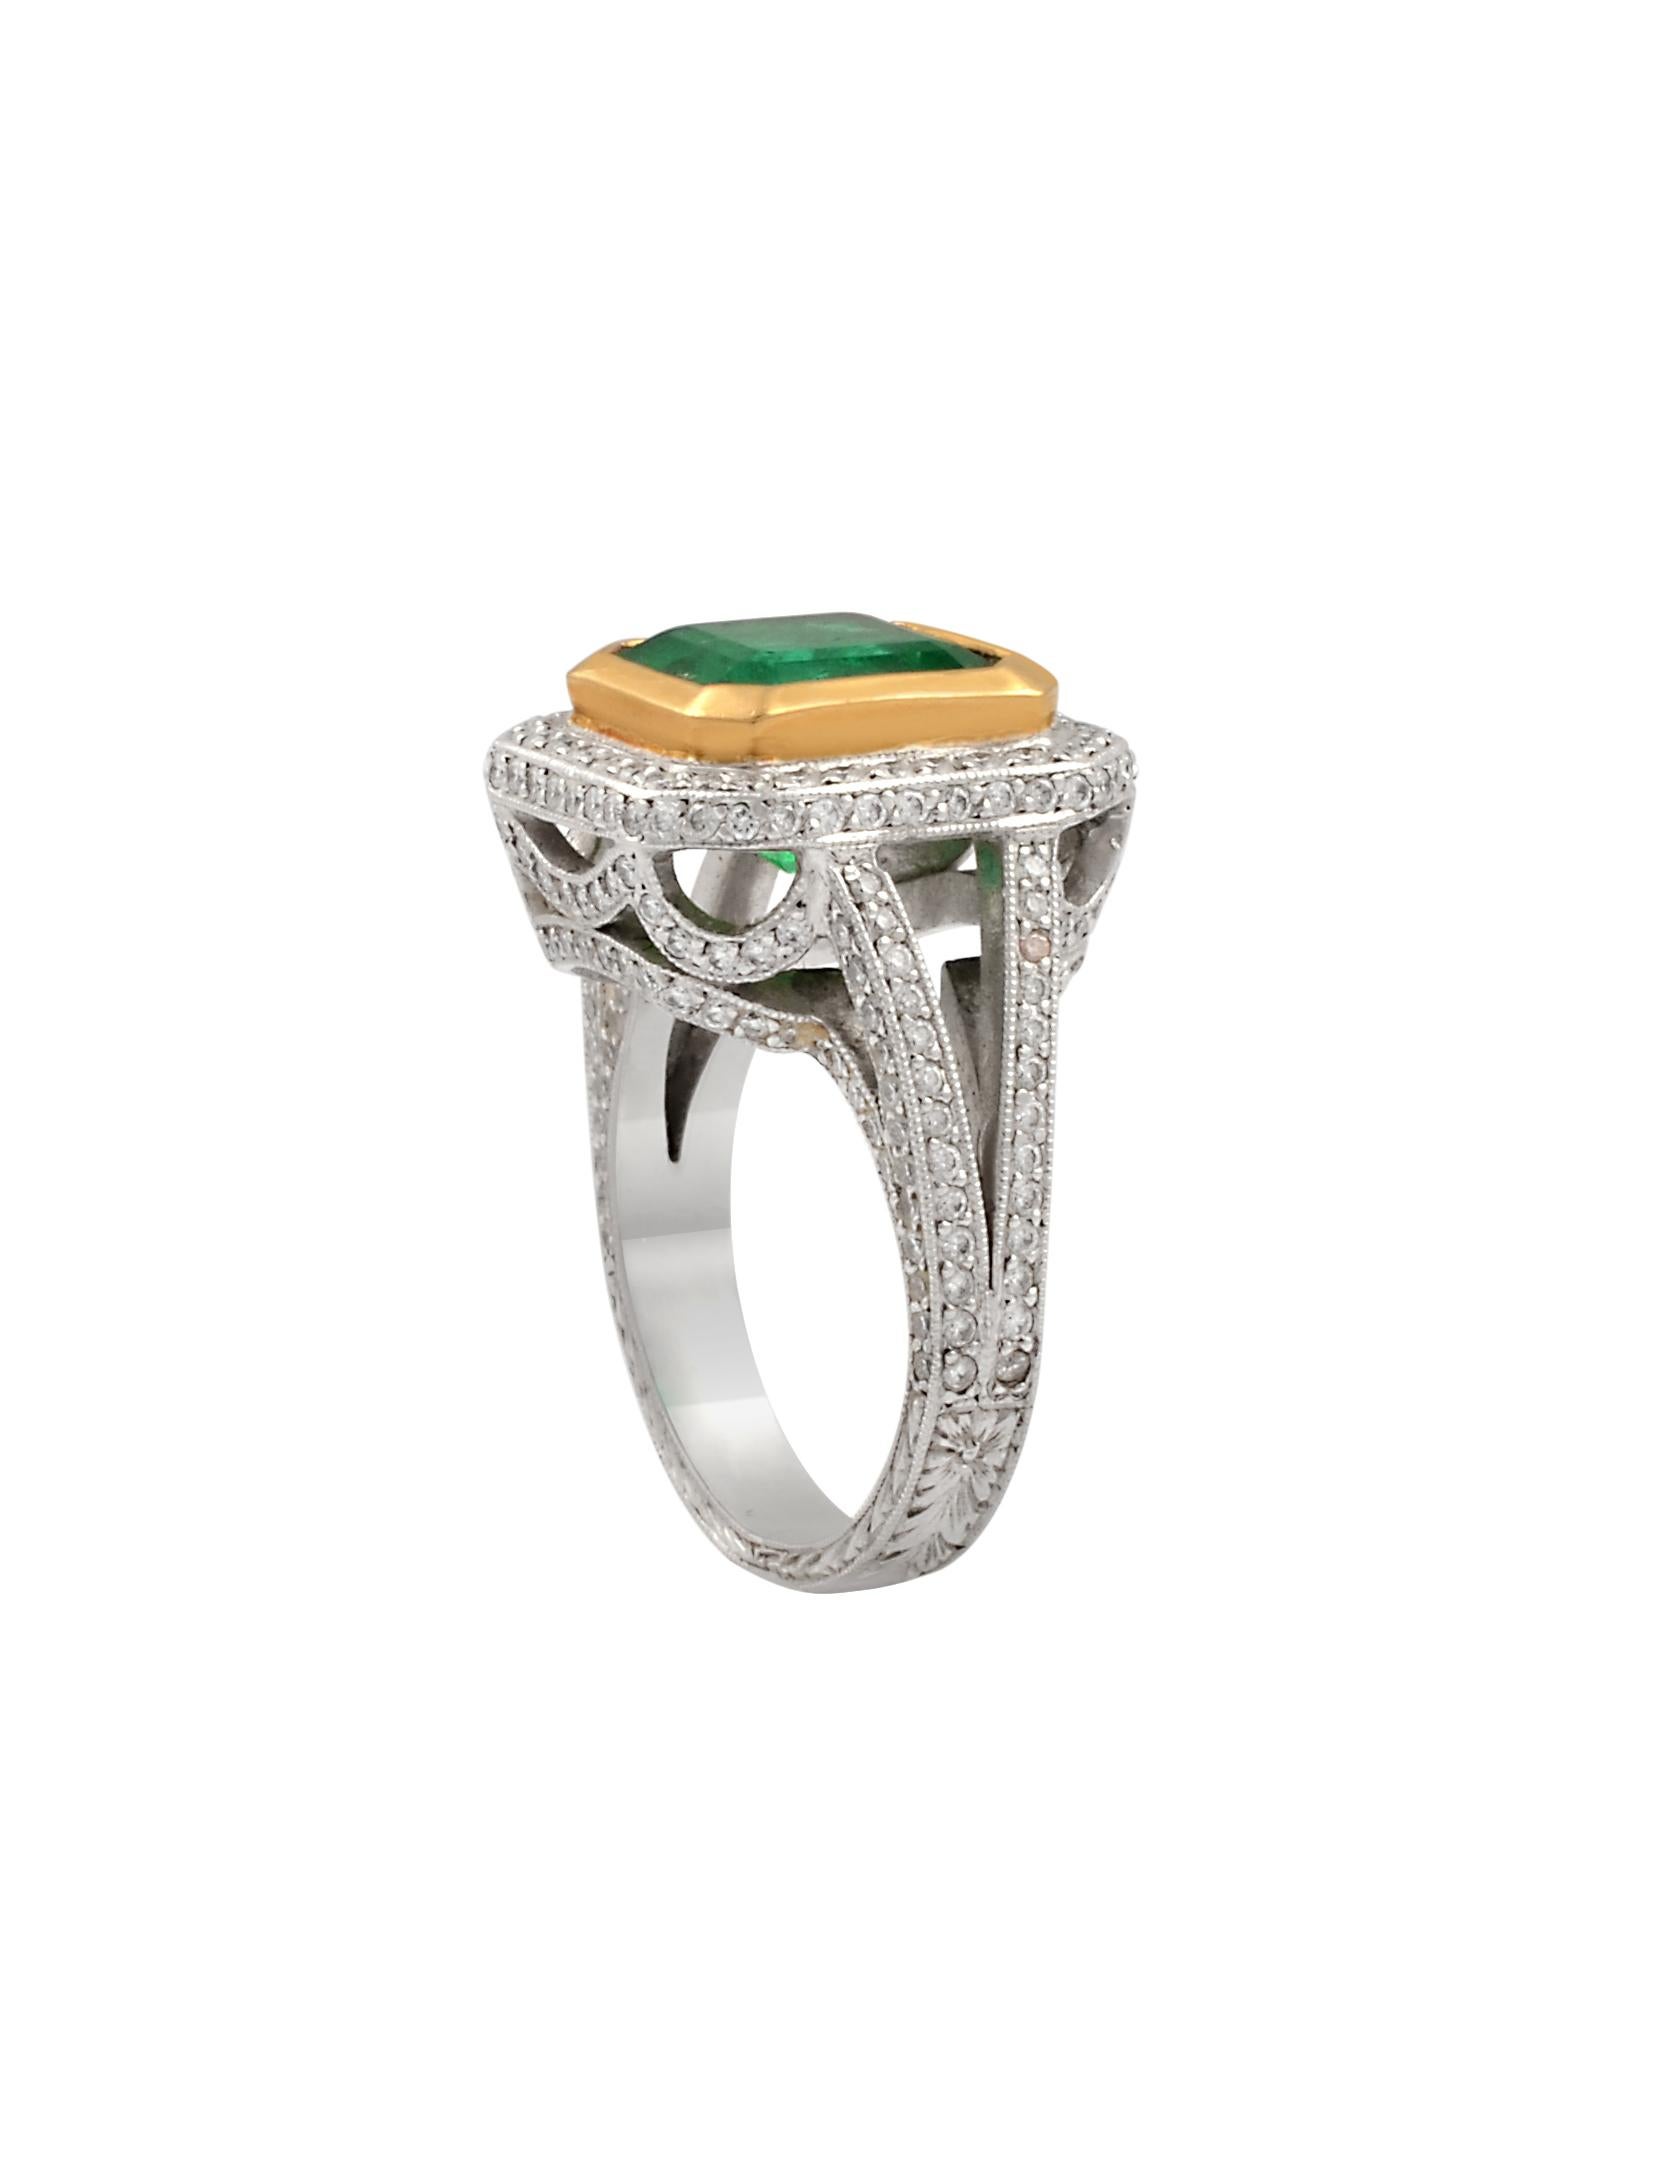 3.8 Carat Emerald Cut Colombian Emerald and Diamond Ring Platinum, Two-Tone 6